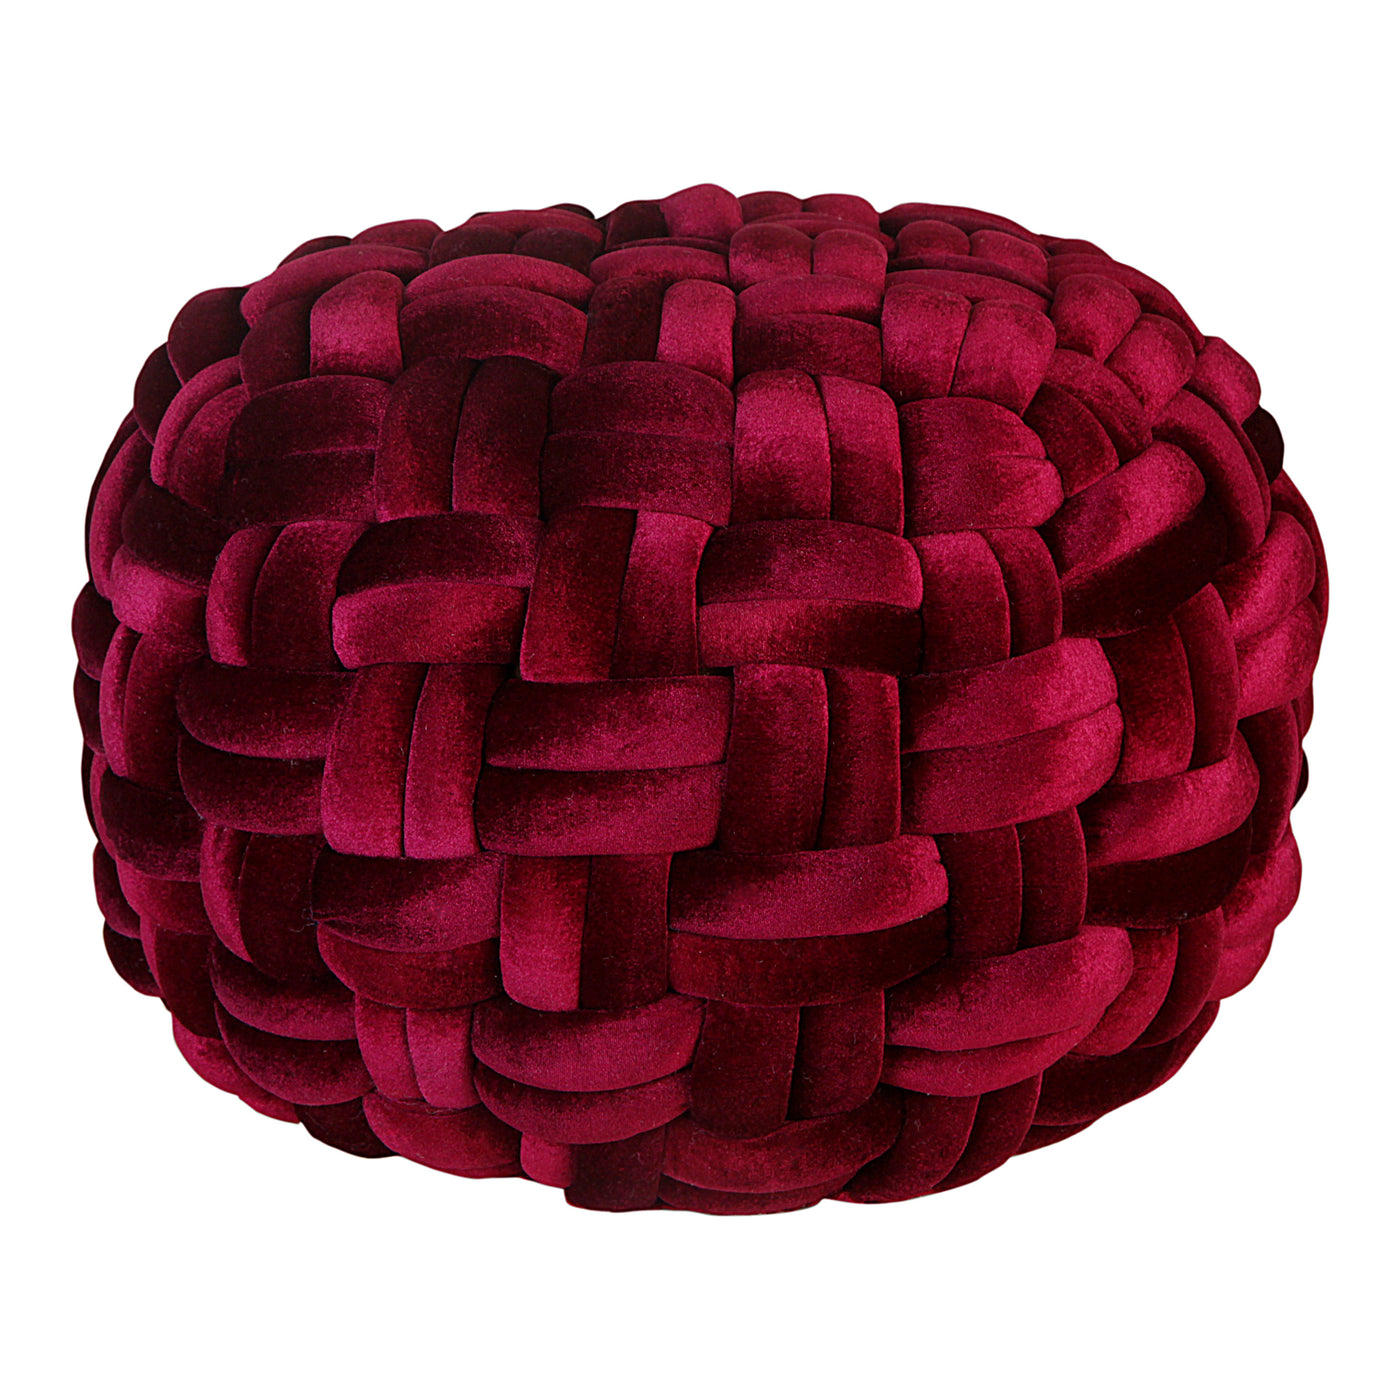 When it comes to occasional seating, you just can't beat a Pouf! This stylish version features a shiny velvet, in a thick ...